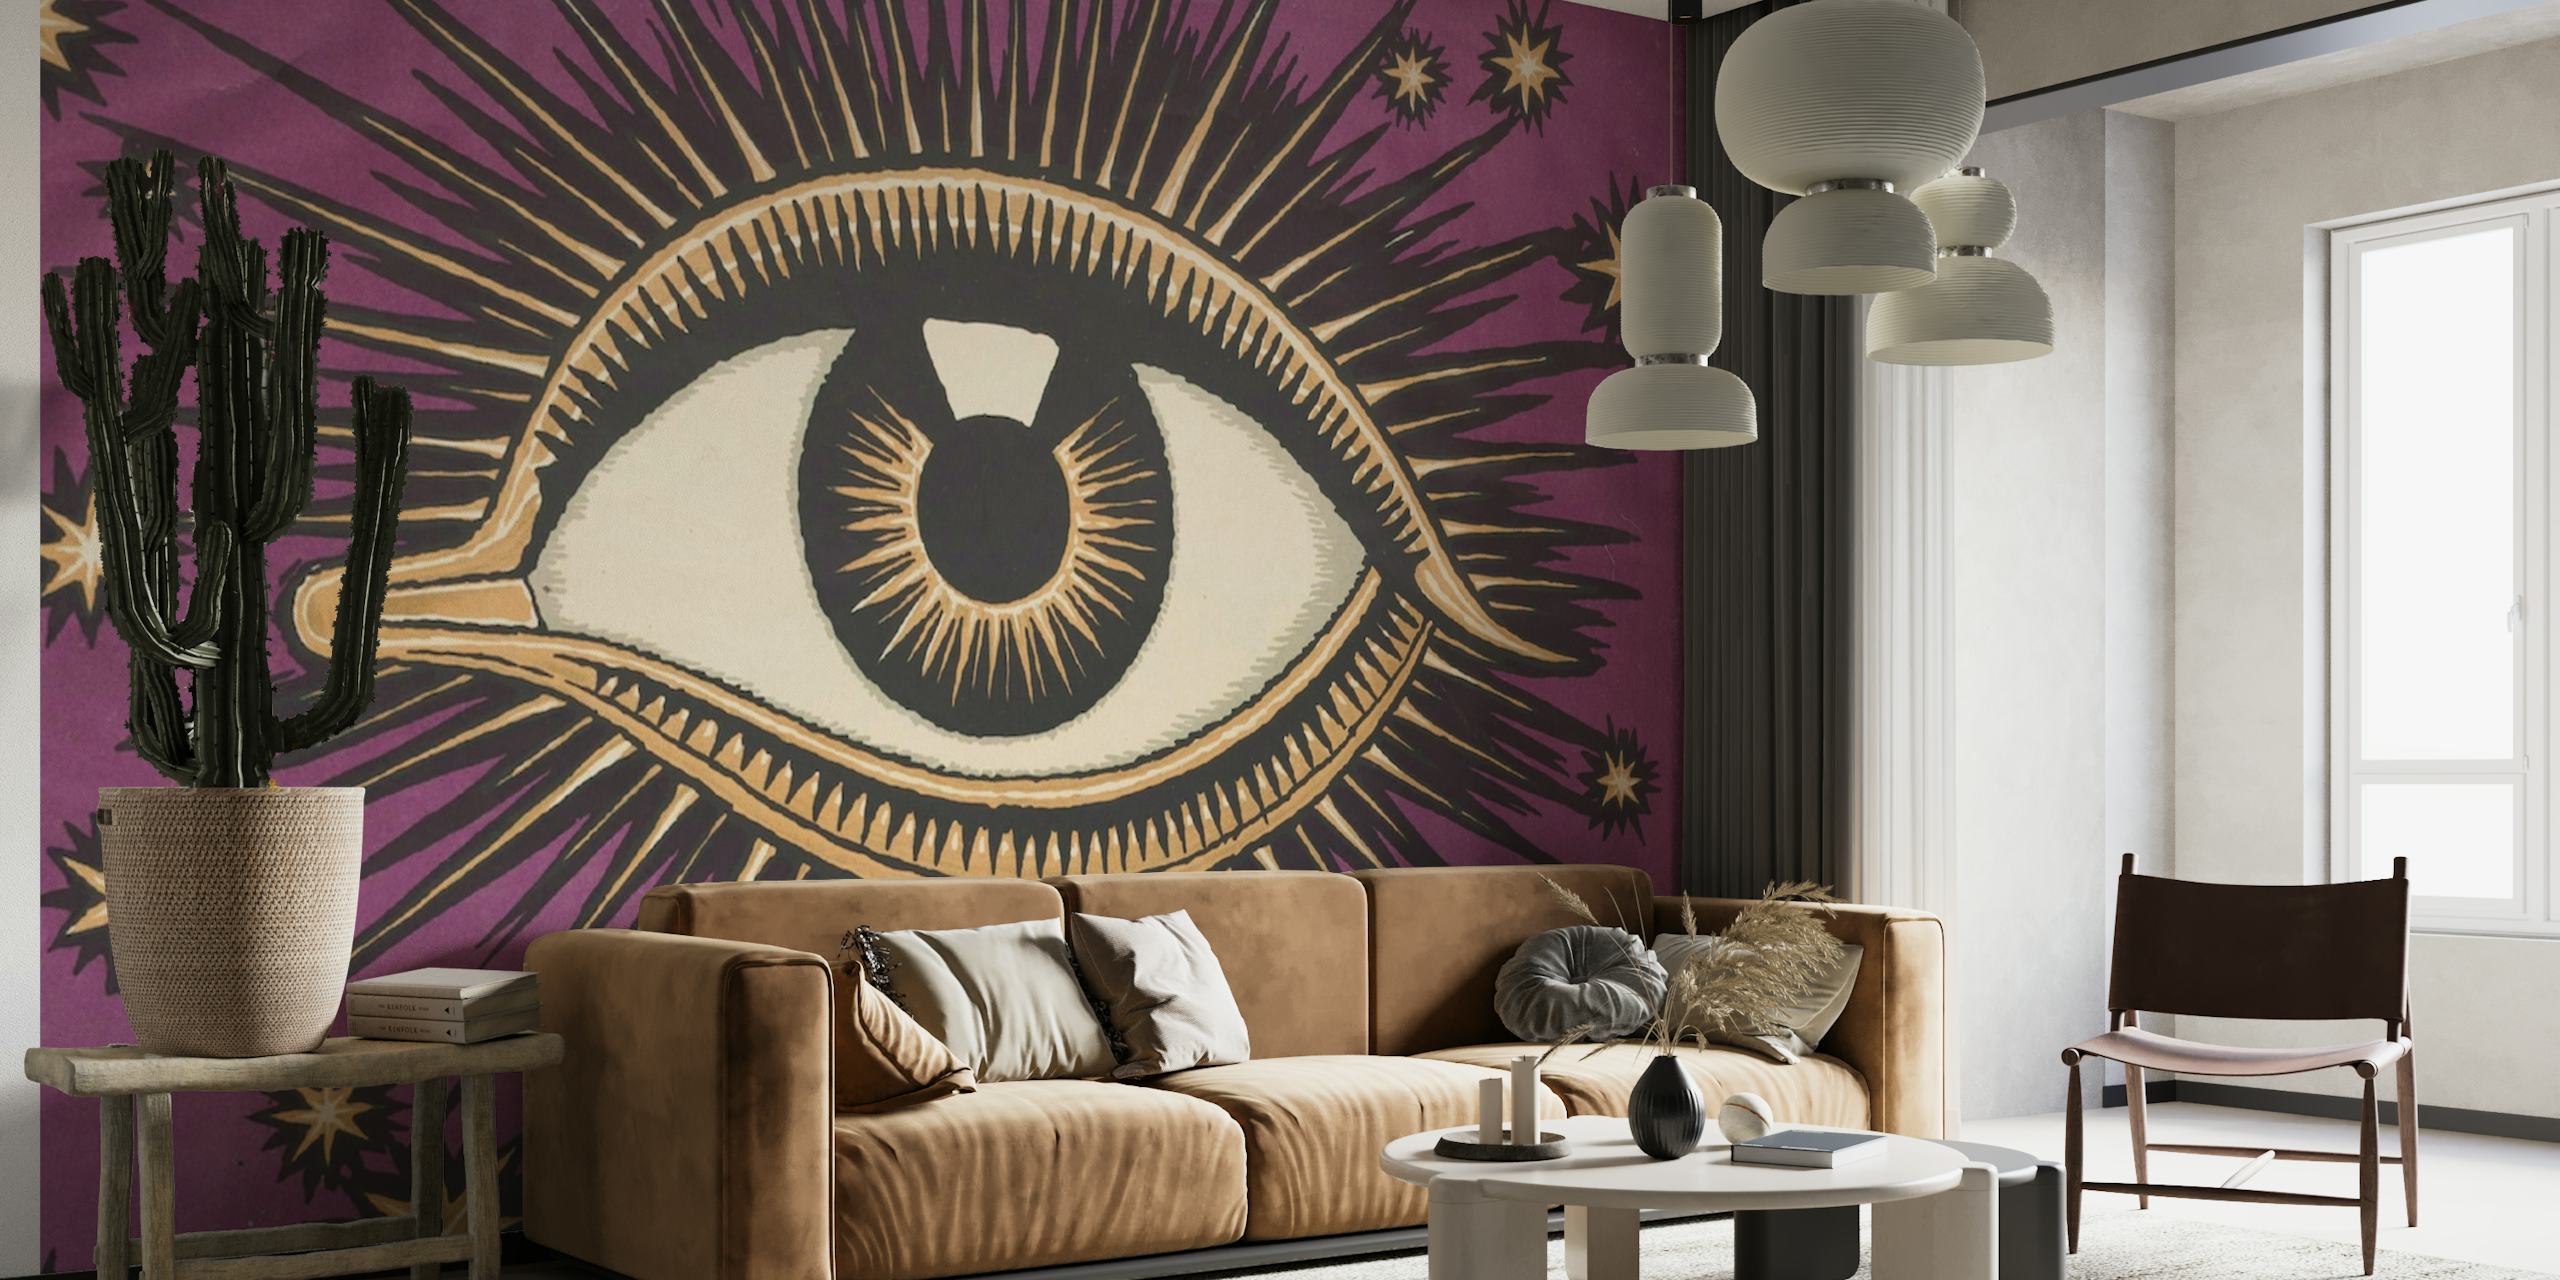 All Seeing Eye wall mural featuring an intricate eye symbol with stars on a purple background